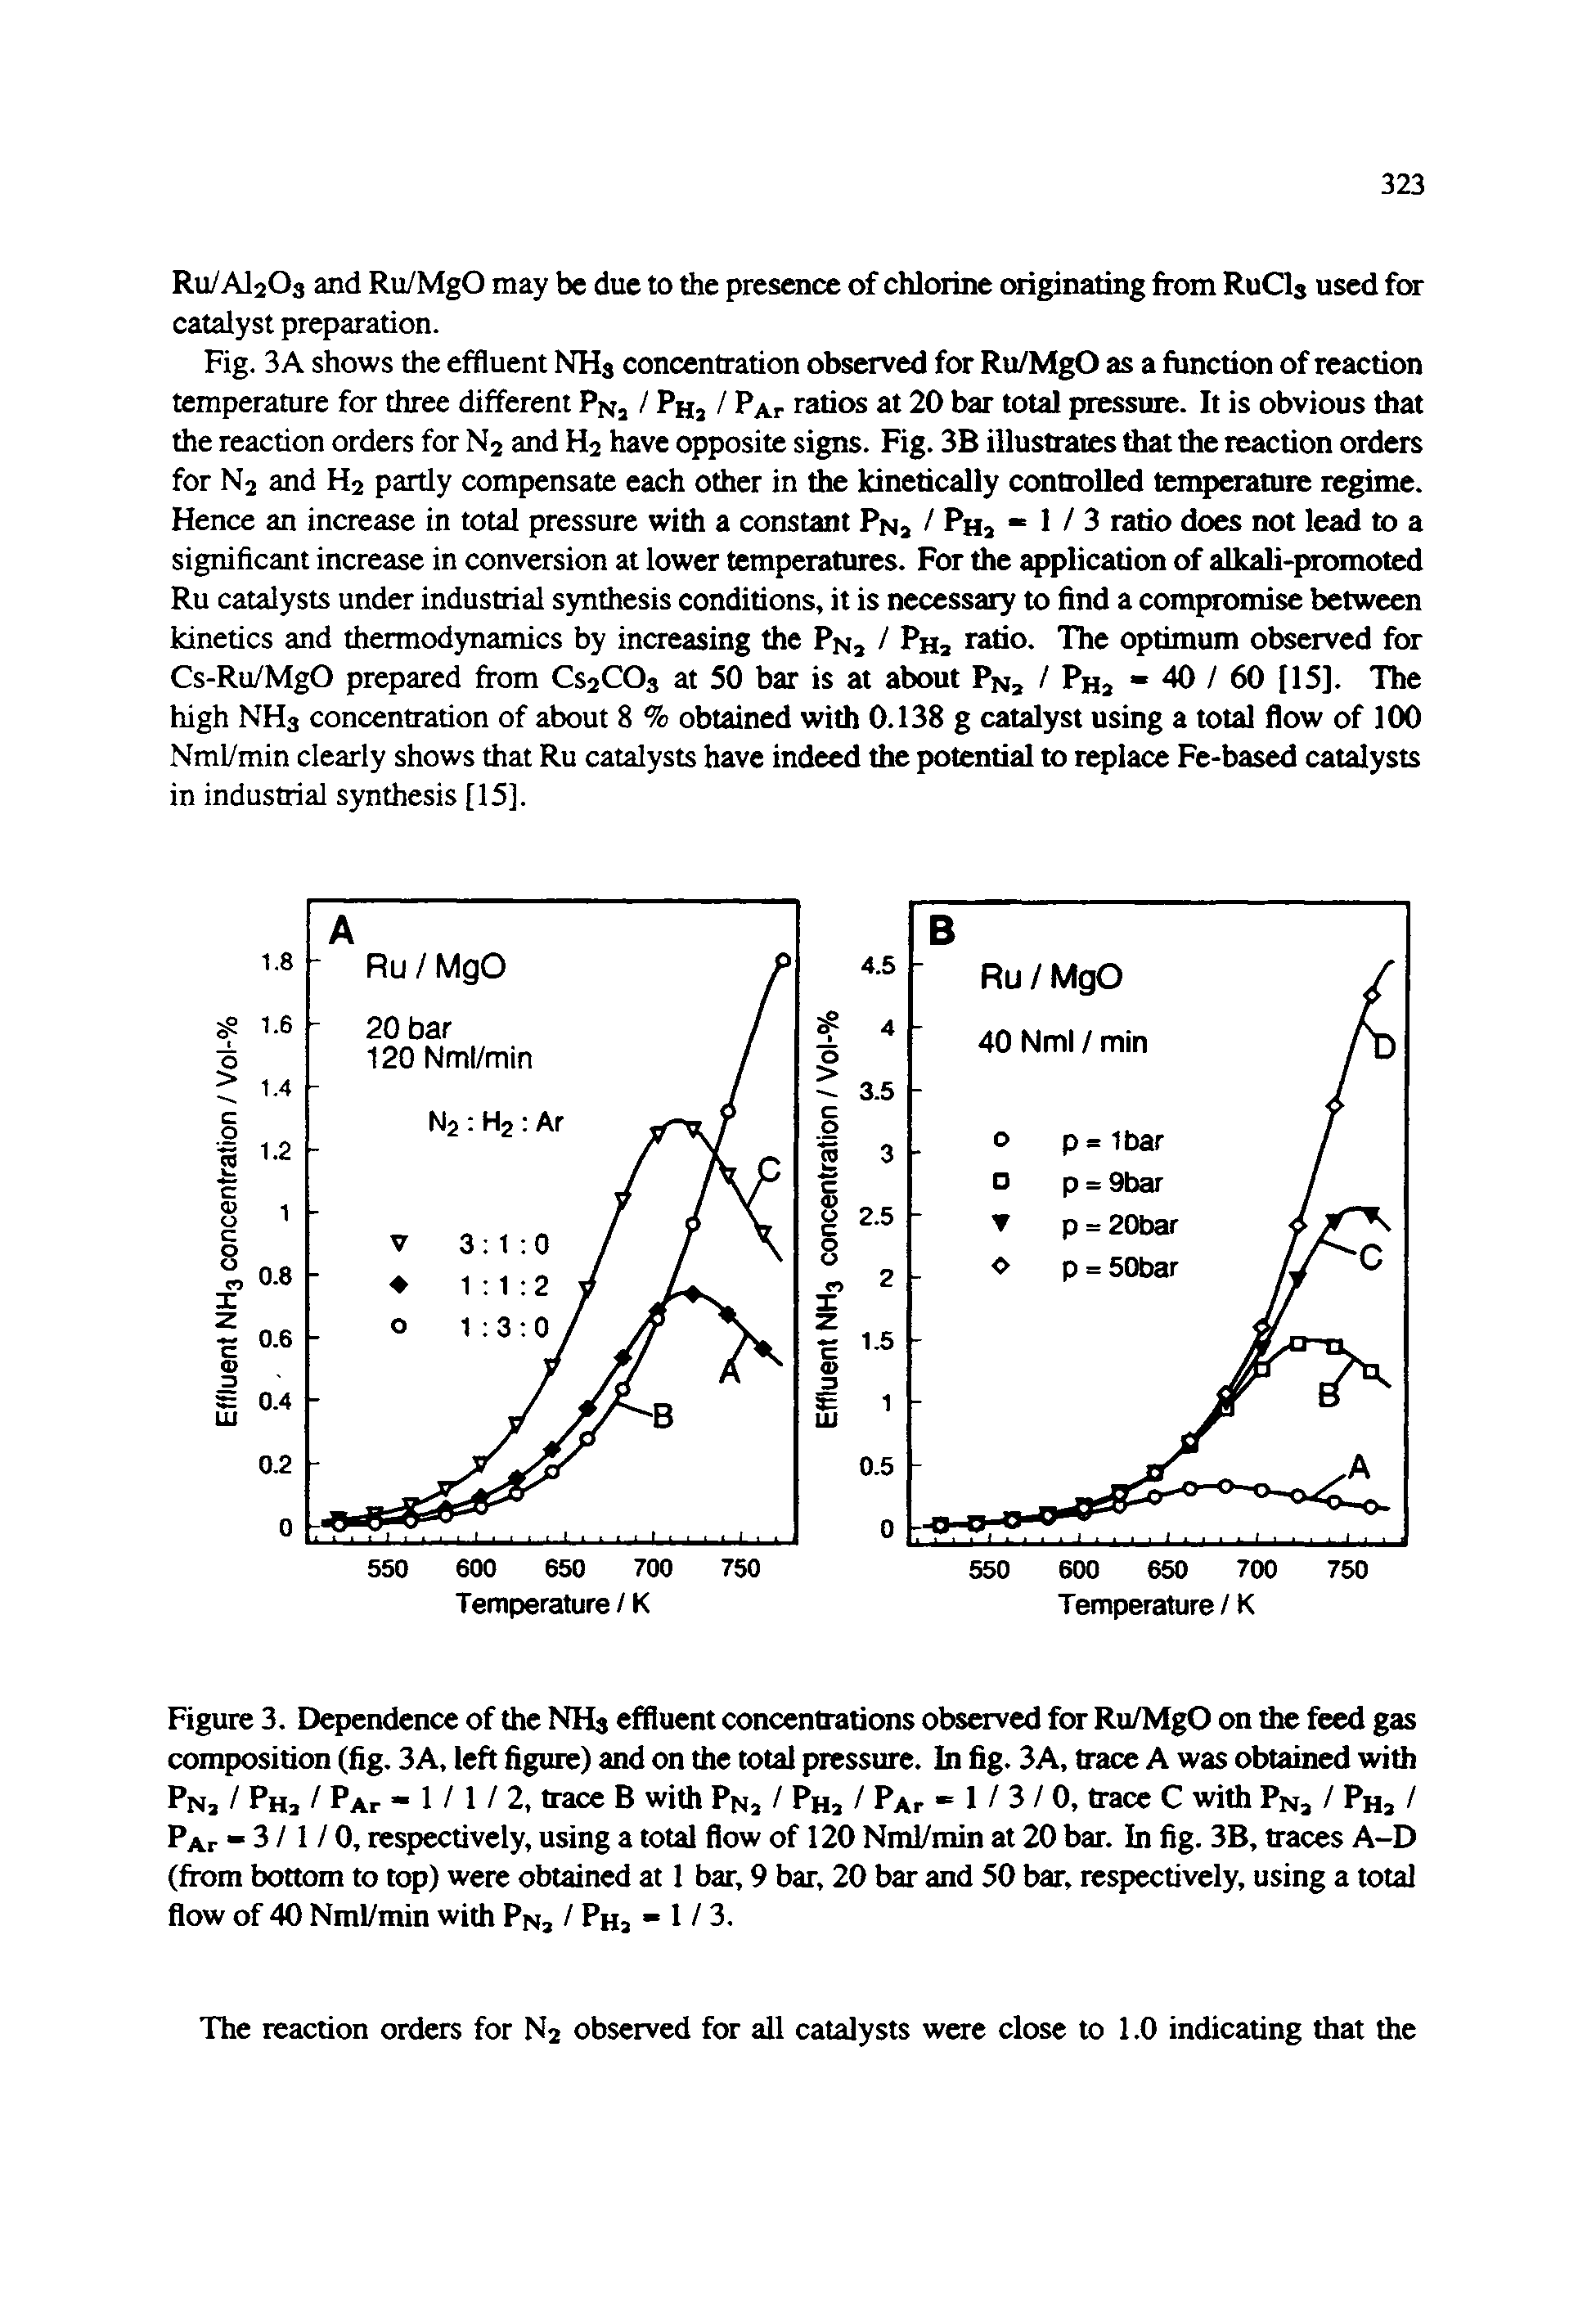 Fig. 3 A shows the effluent NH3 concentration observed for Ru/MgO as a function of reaction temperature for three different Pn, / Phj / Paf ratios at 20 bar total pressure. It is obvious that the reaction orders for N2 and H2 have opposite signs. Fig. 3B illustrates that the reaction orders for N2 and H2 partly compensate each other in the kineticaliy controlled temperature regime. Hence an increase in total pressure with a constant Pnj / Phj 1/3 ratio does not lead to a significant increase in conversion at lower temperatures. For the plication of alkali-promoted Ru catalysts under industrial synthesis conditions, it is necessary to find a compromise between kinetics and thermodynamics by increasing the Pn, / Phj ratio. The optimum observed for Cs-Ru/MgO prepared from CS2CO3 at 50 bar is at about Pnj / Phj 40 / 60 [15]. The high NH3 concentration of about 8 % obtained with 0.138 g catalyst using a total flow of 100 Nml/min clearly shows that Ru catalysts have indeed the potential to replace Fe-based catalysts in industrial synthesis [15].